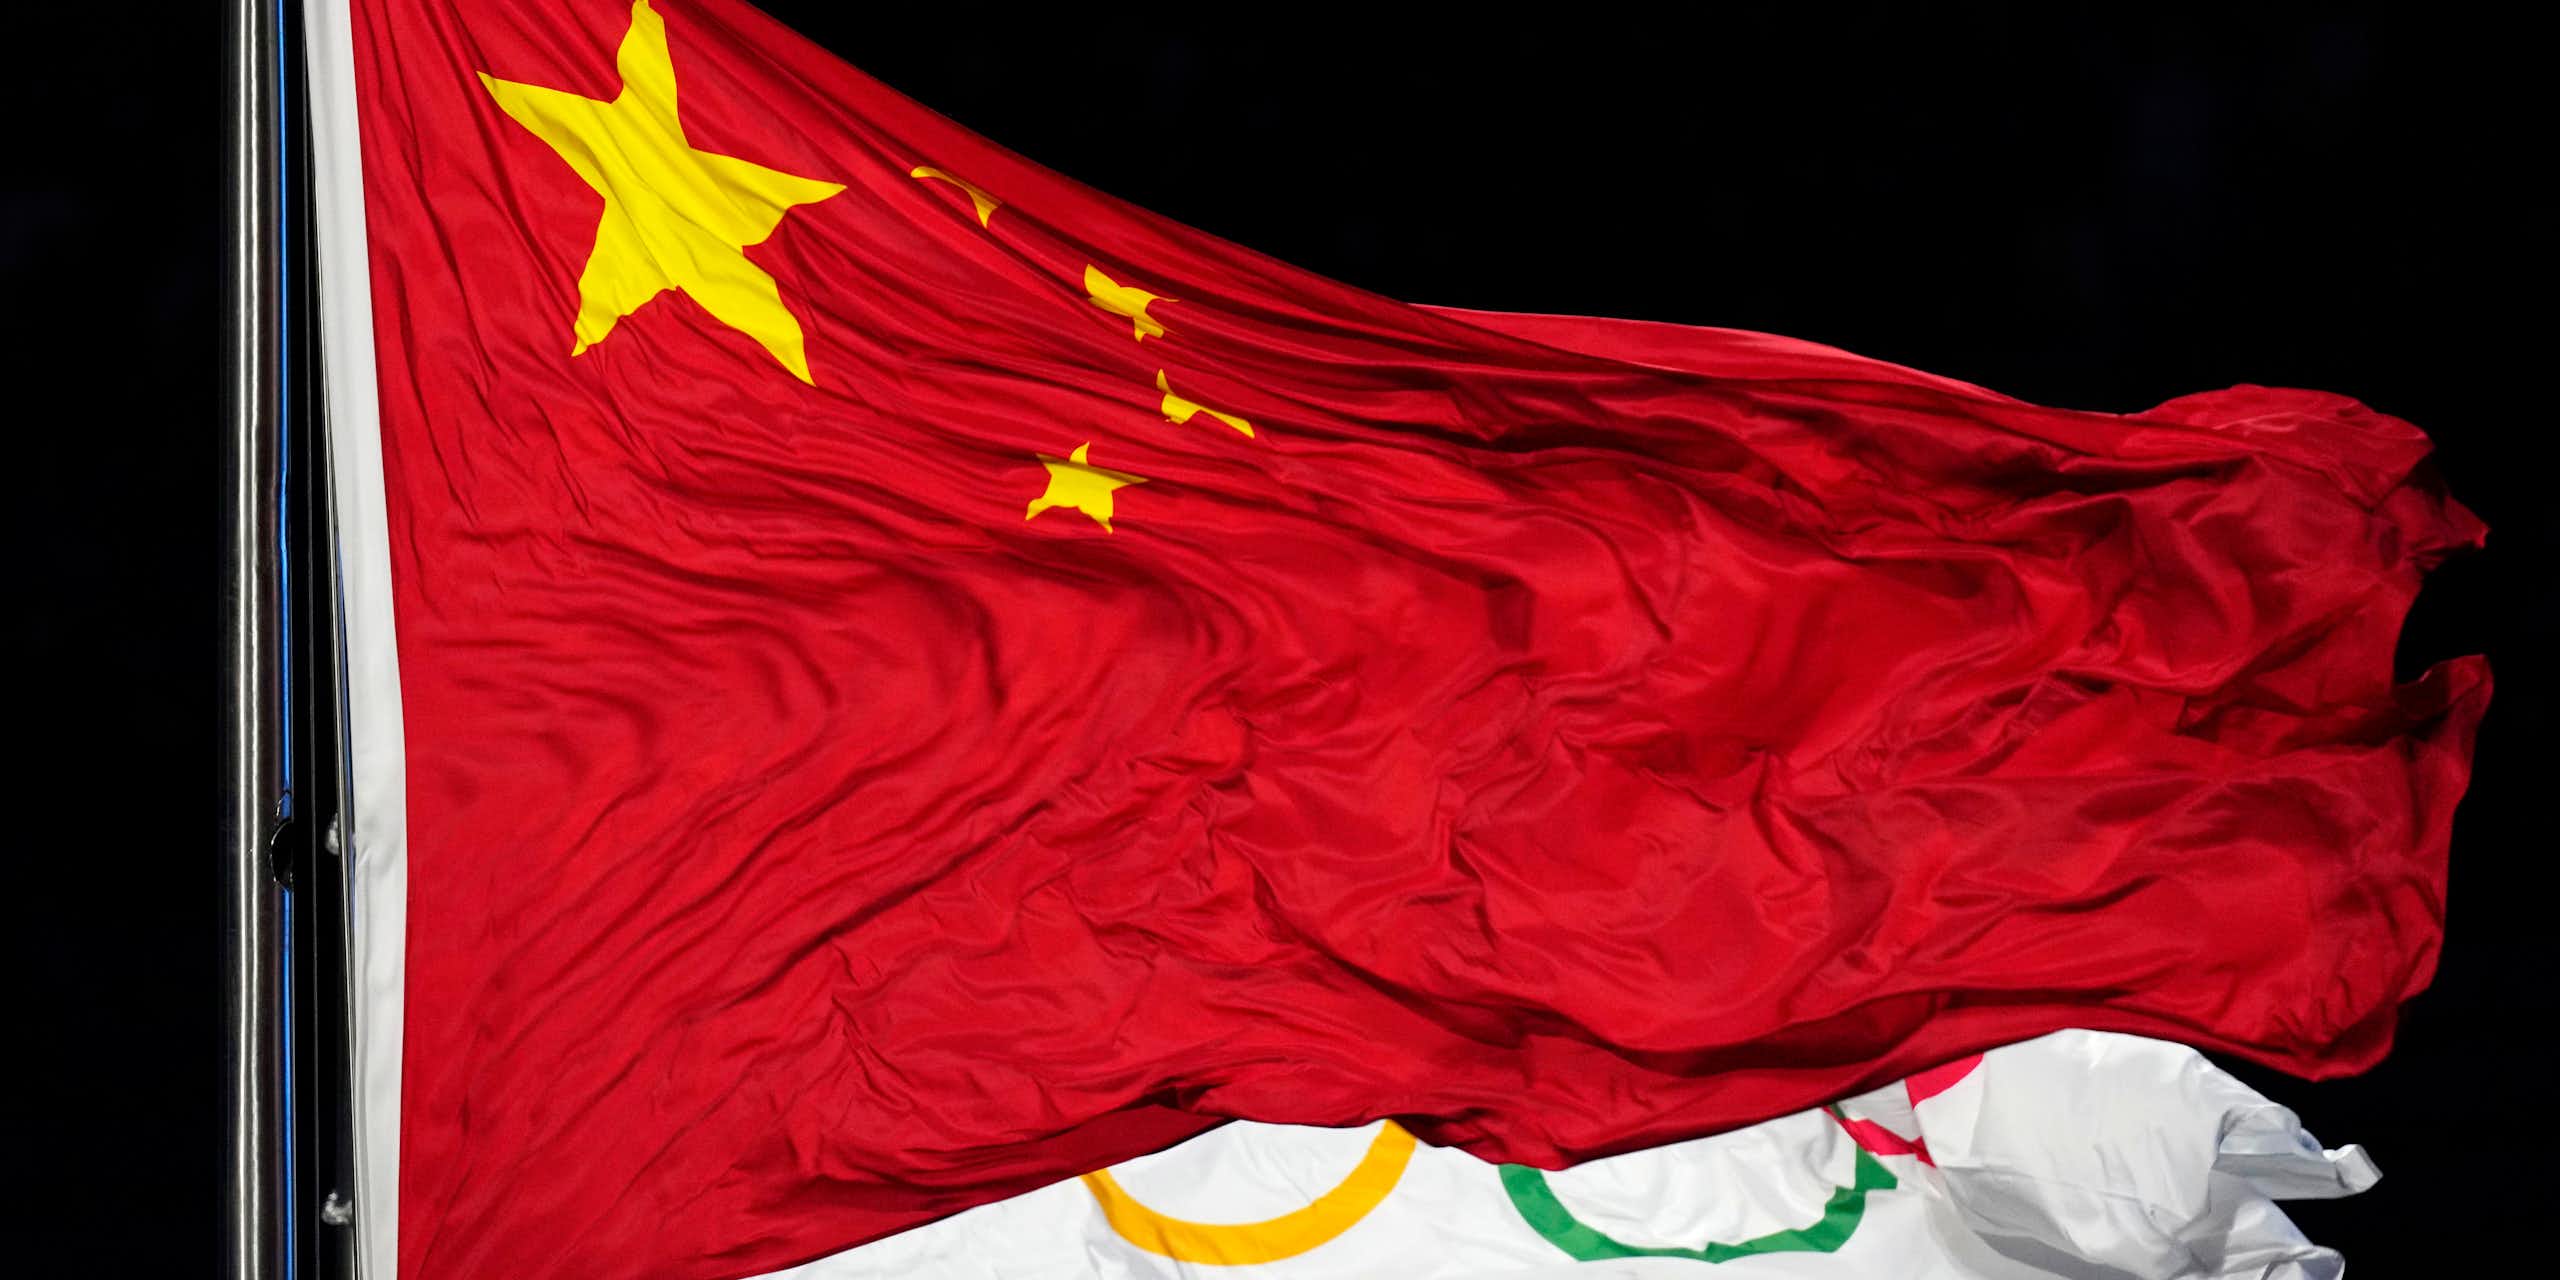 The Chinese and Olympic flags flutter together